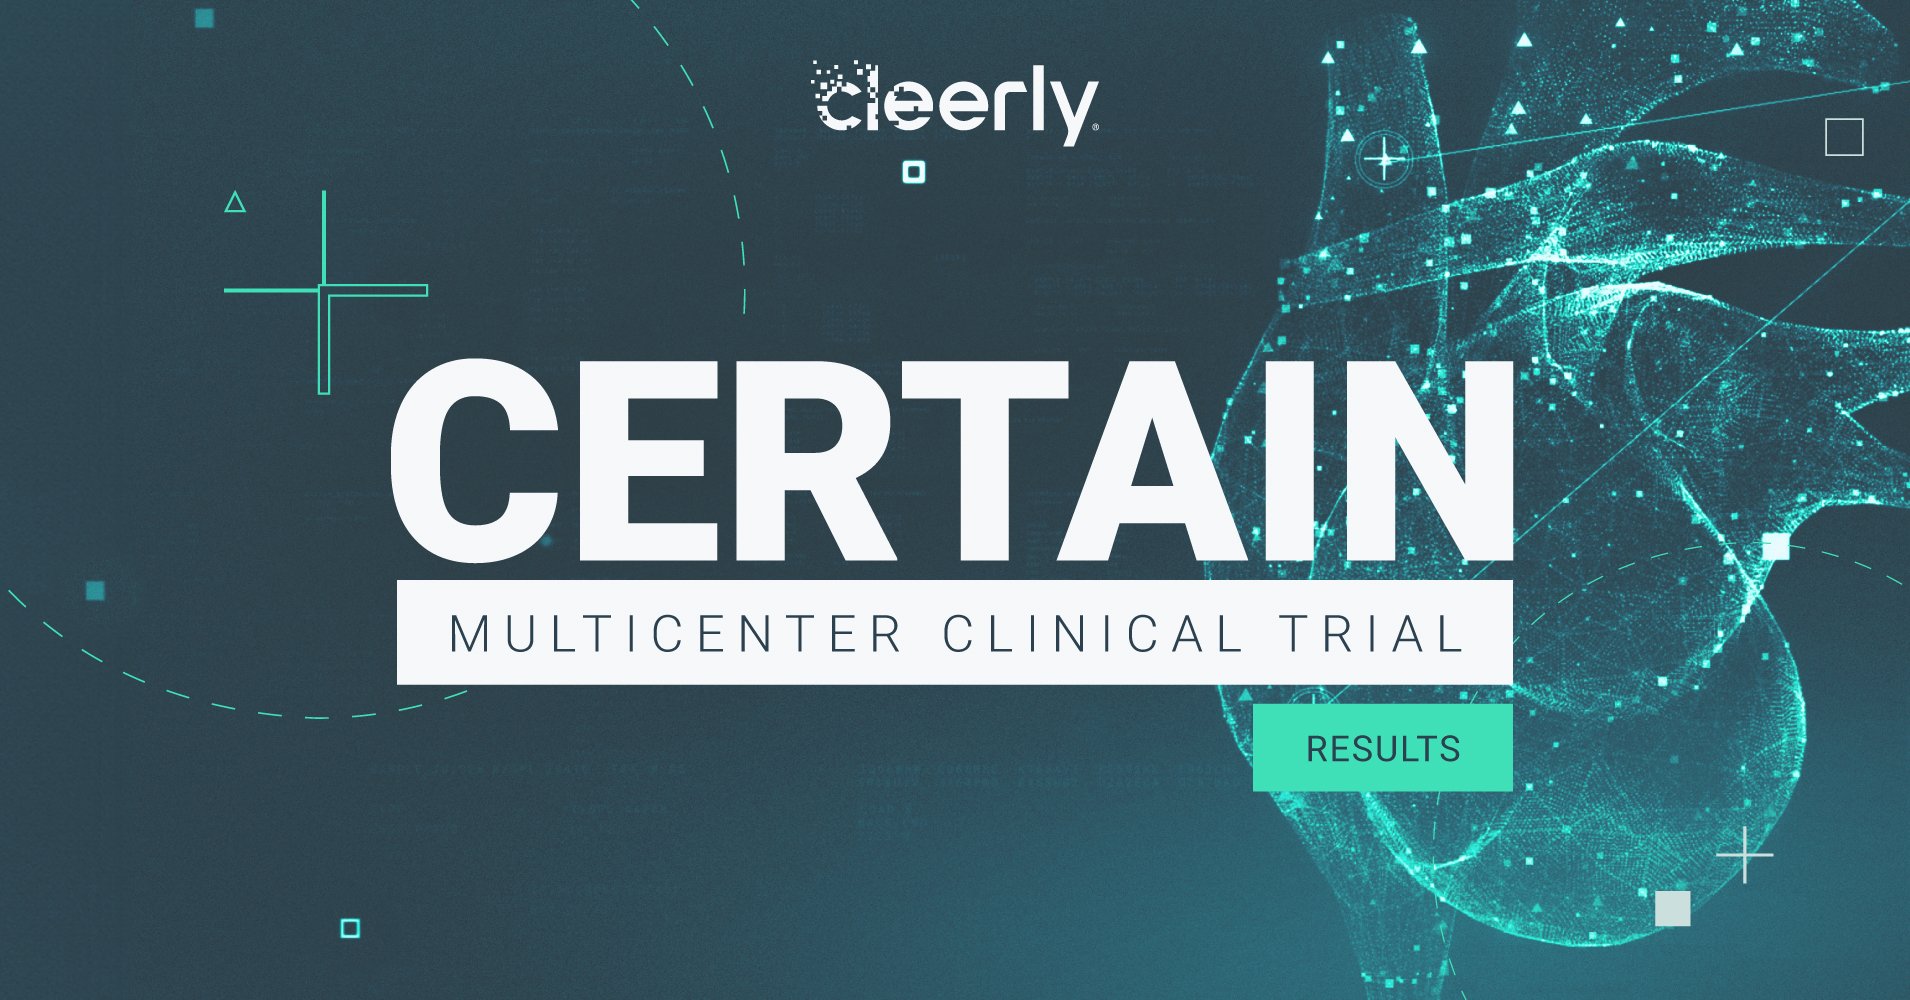 Cleerly Announces CERTAIN Multicenter Clinical Trial Results